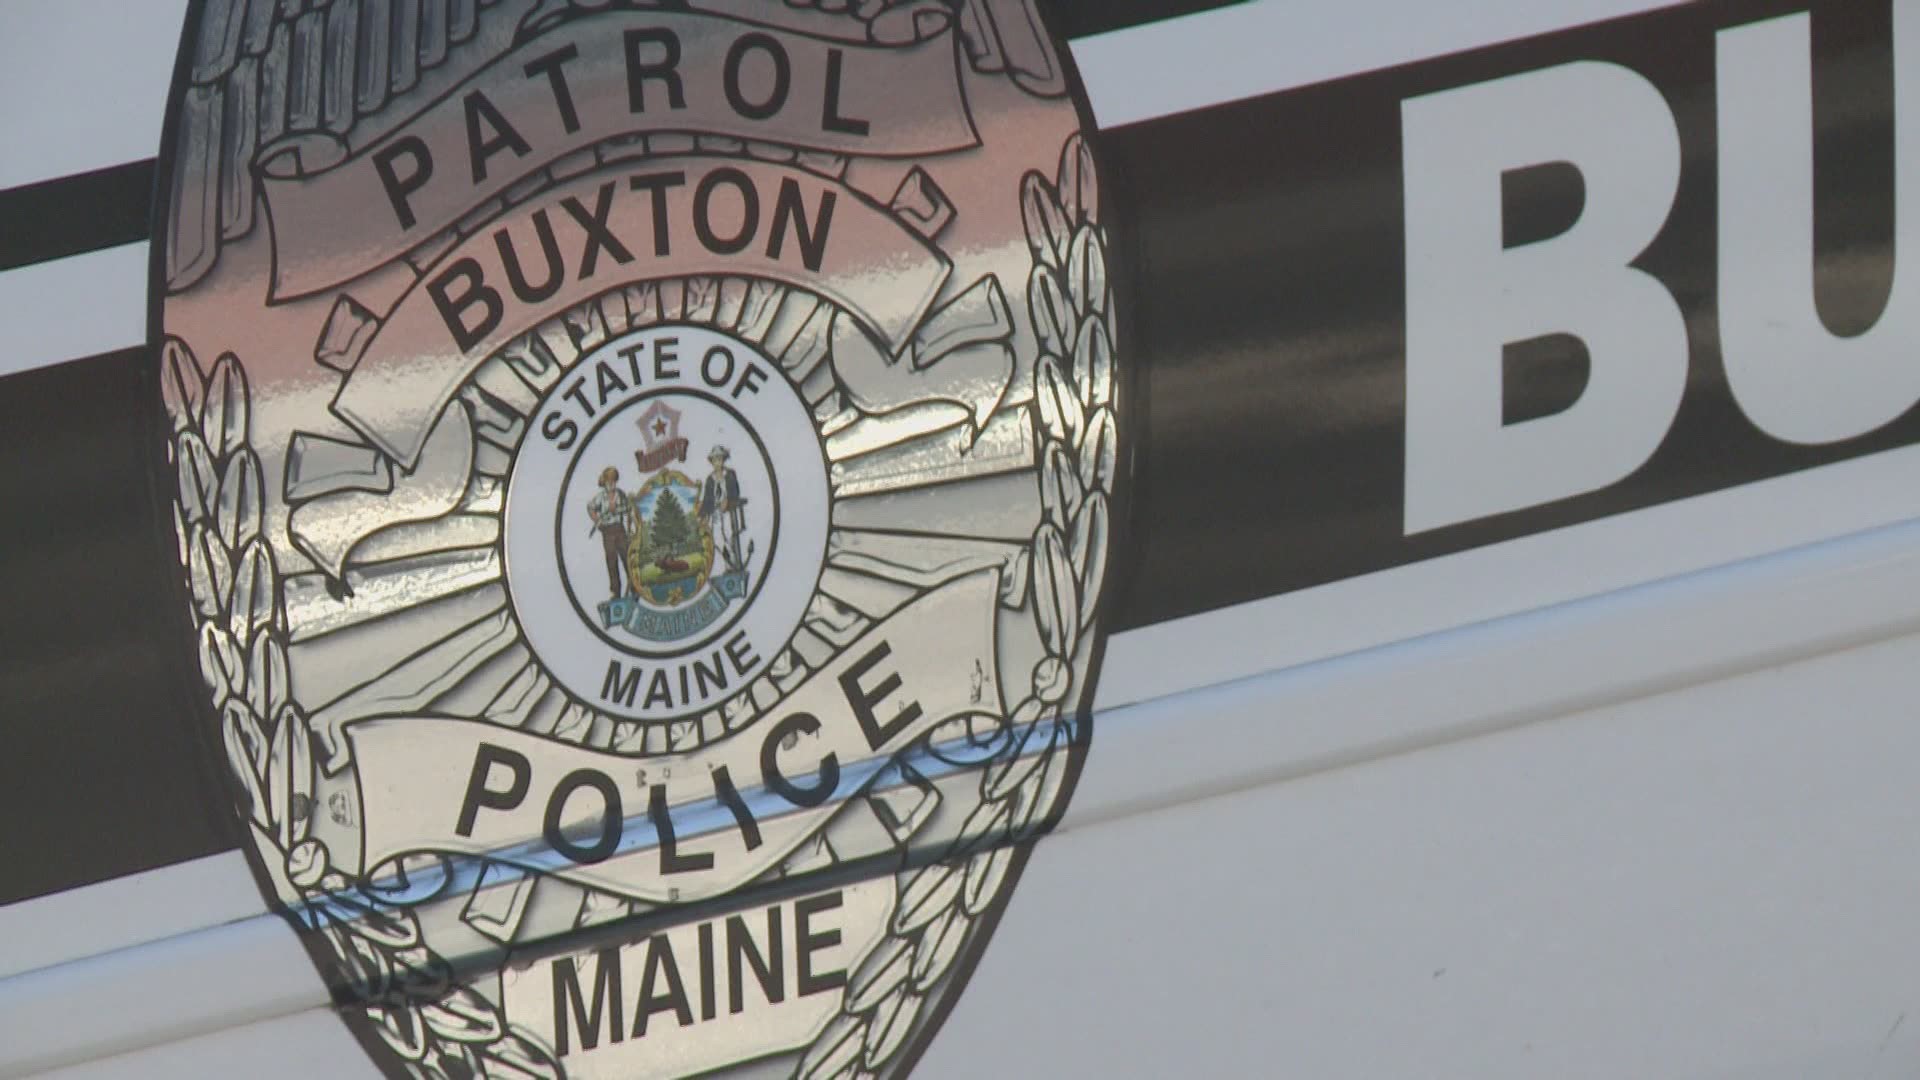 The Buxton Police Department learned that an officer had tested positive for the virus and is isolating with minor symptoms.